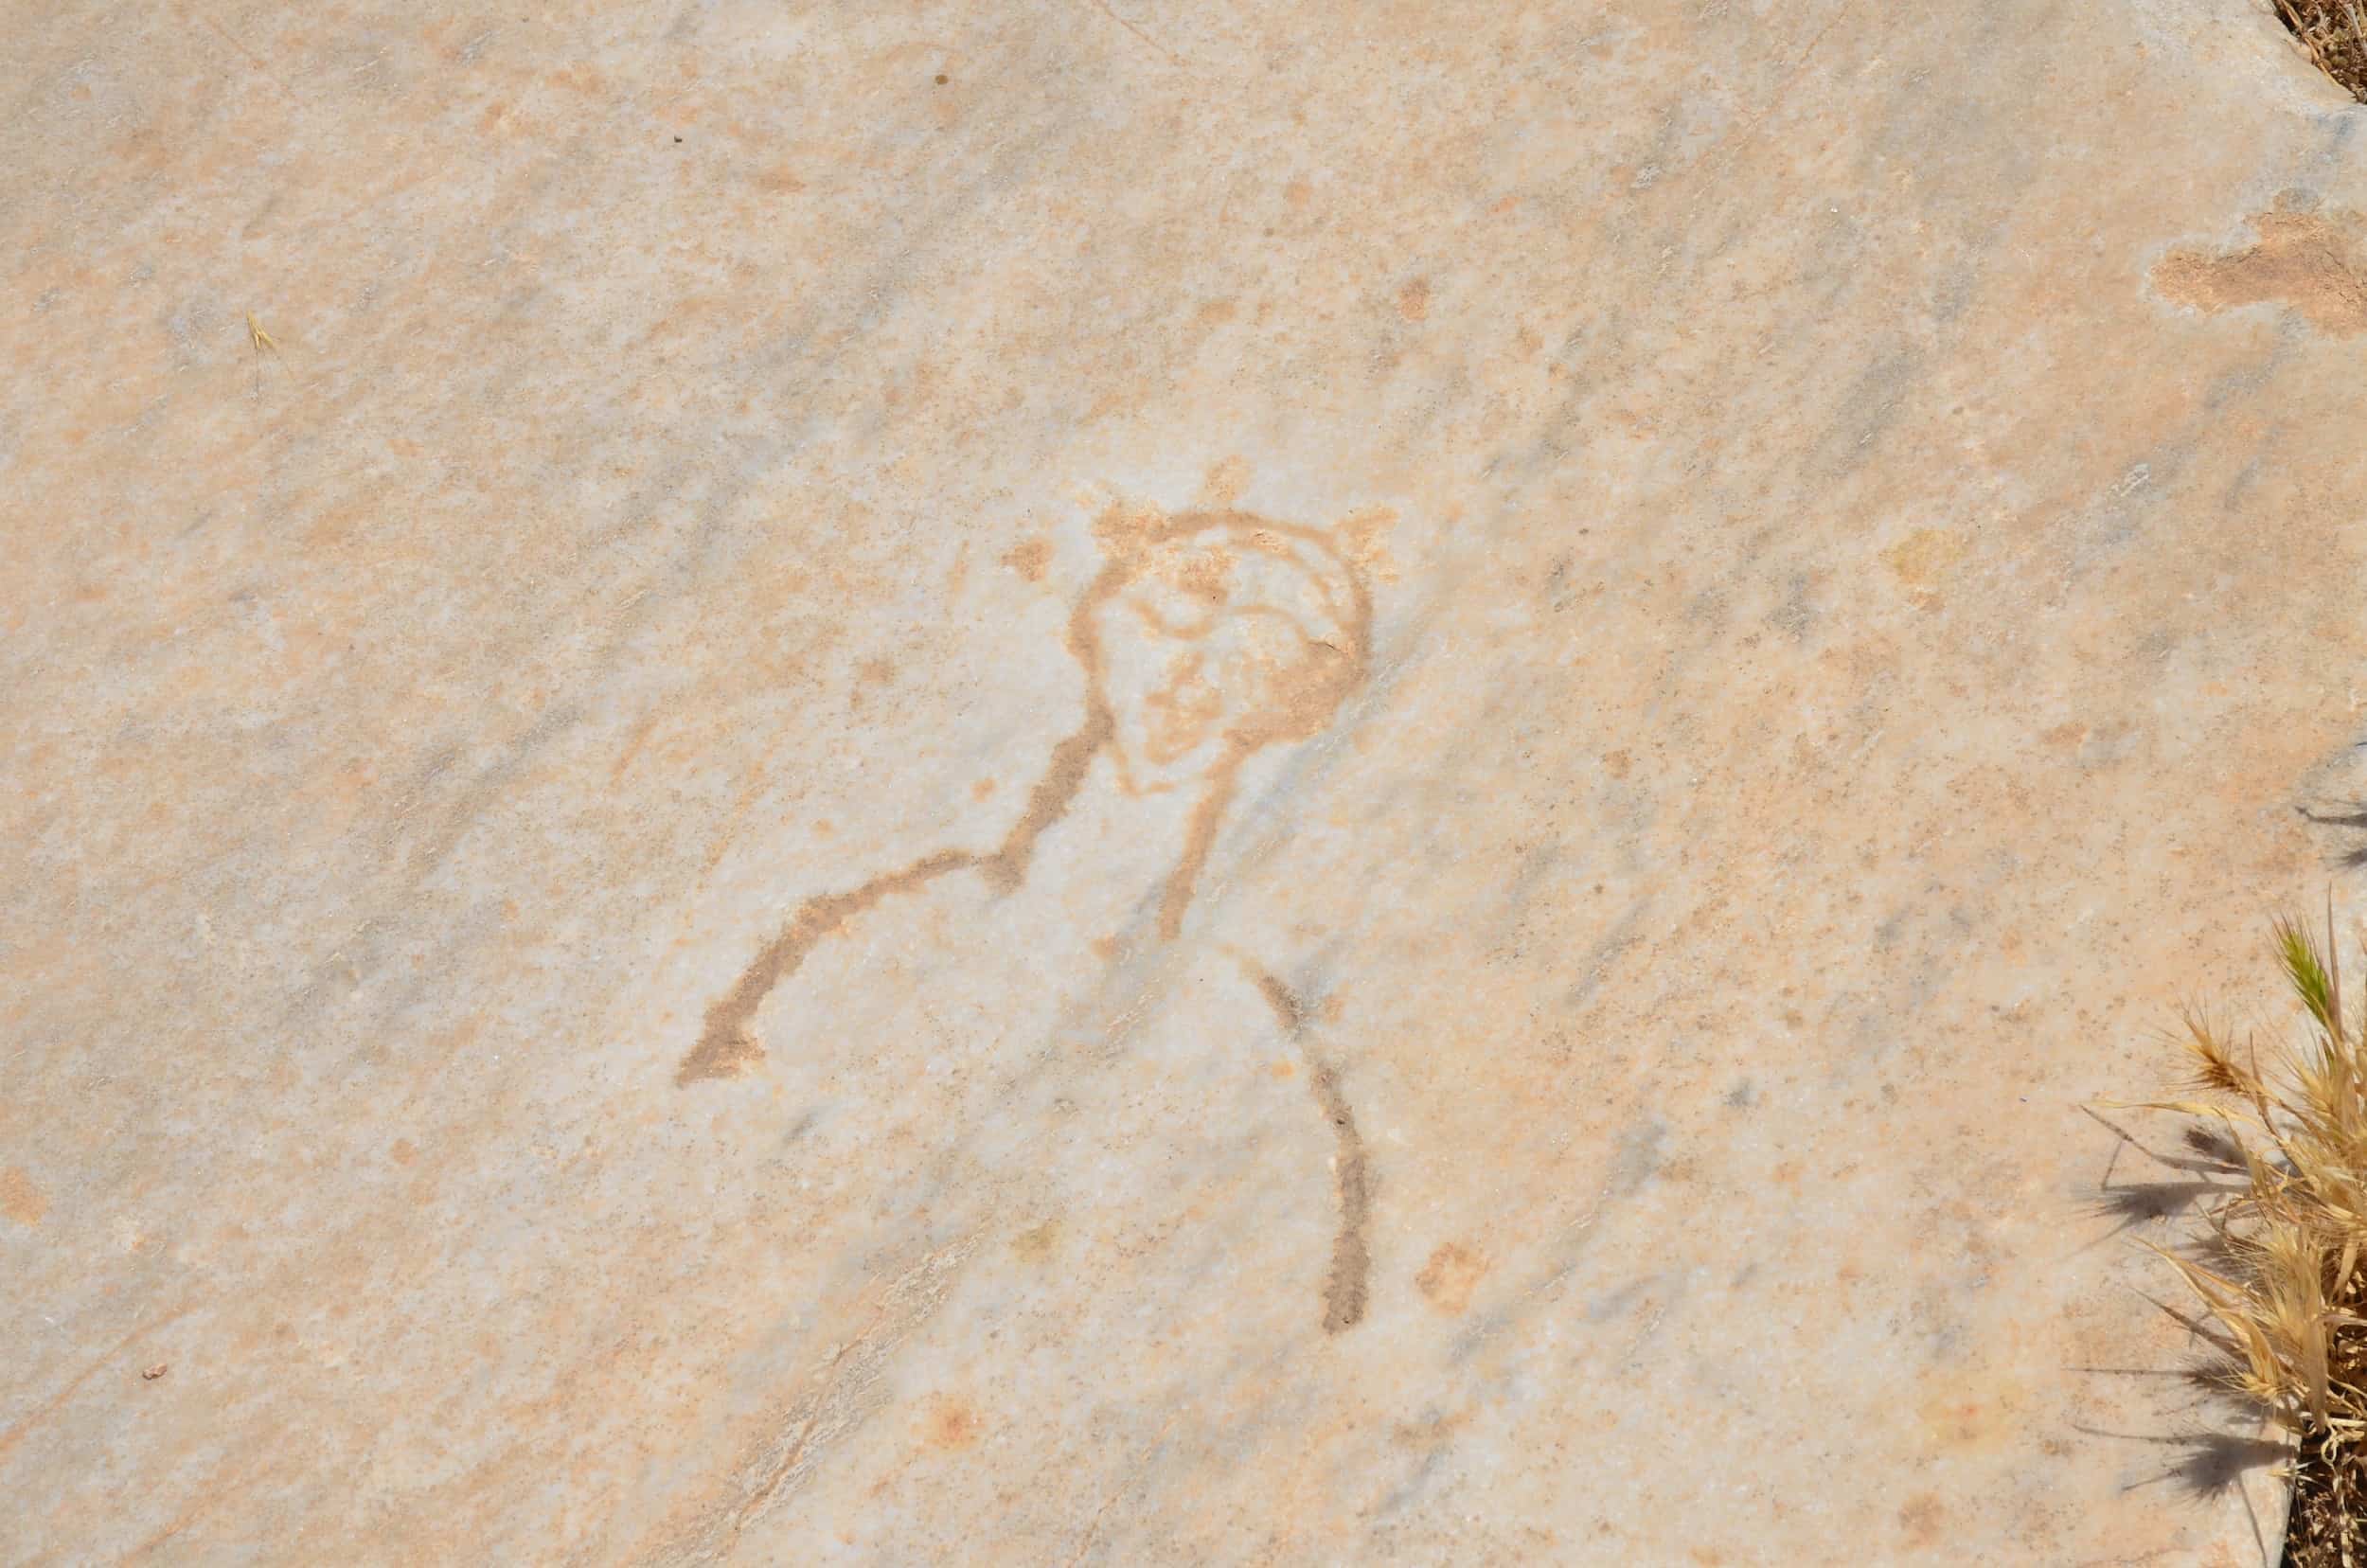 Human figure on the floor in the atrium at the Church of Mary